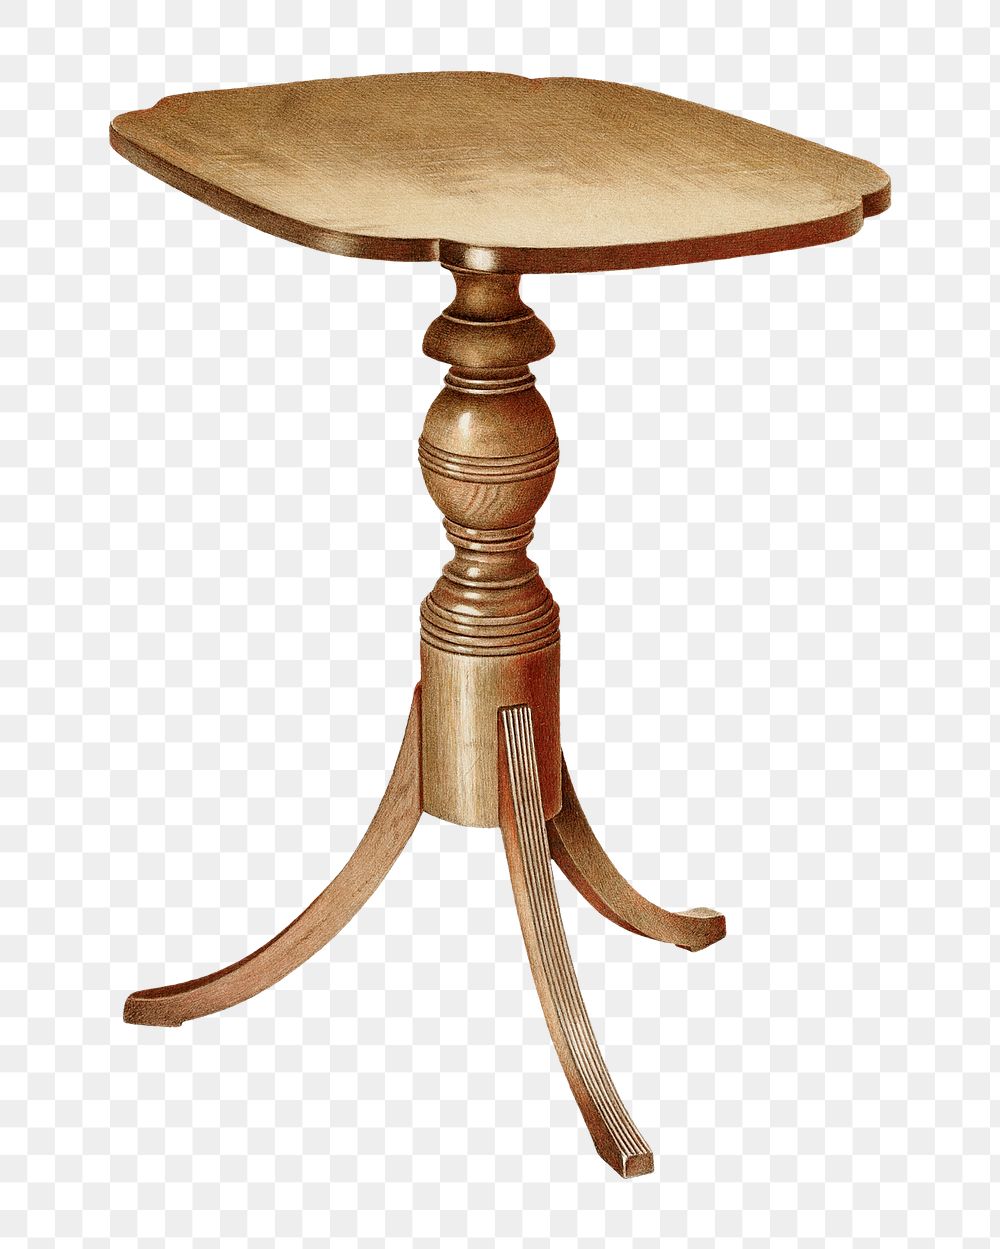 Vintage table png illustration, remixed from the artwork by Michael Riccitelli